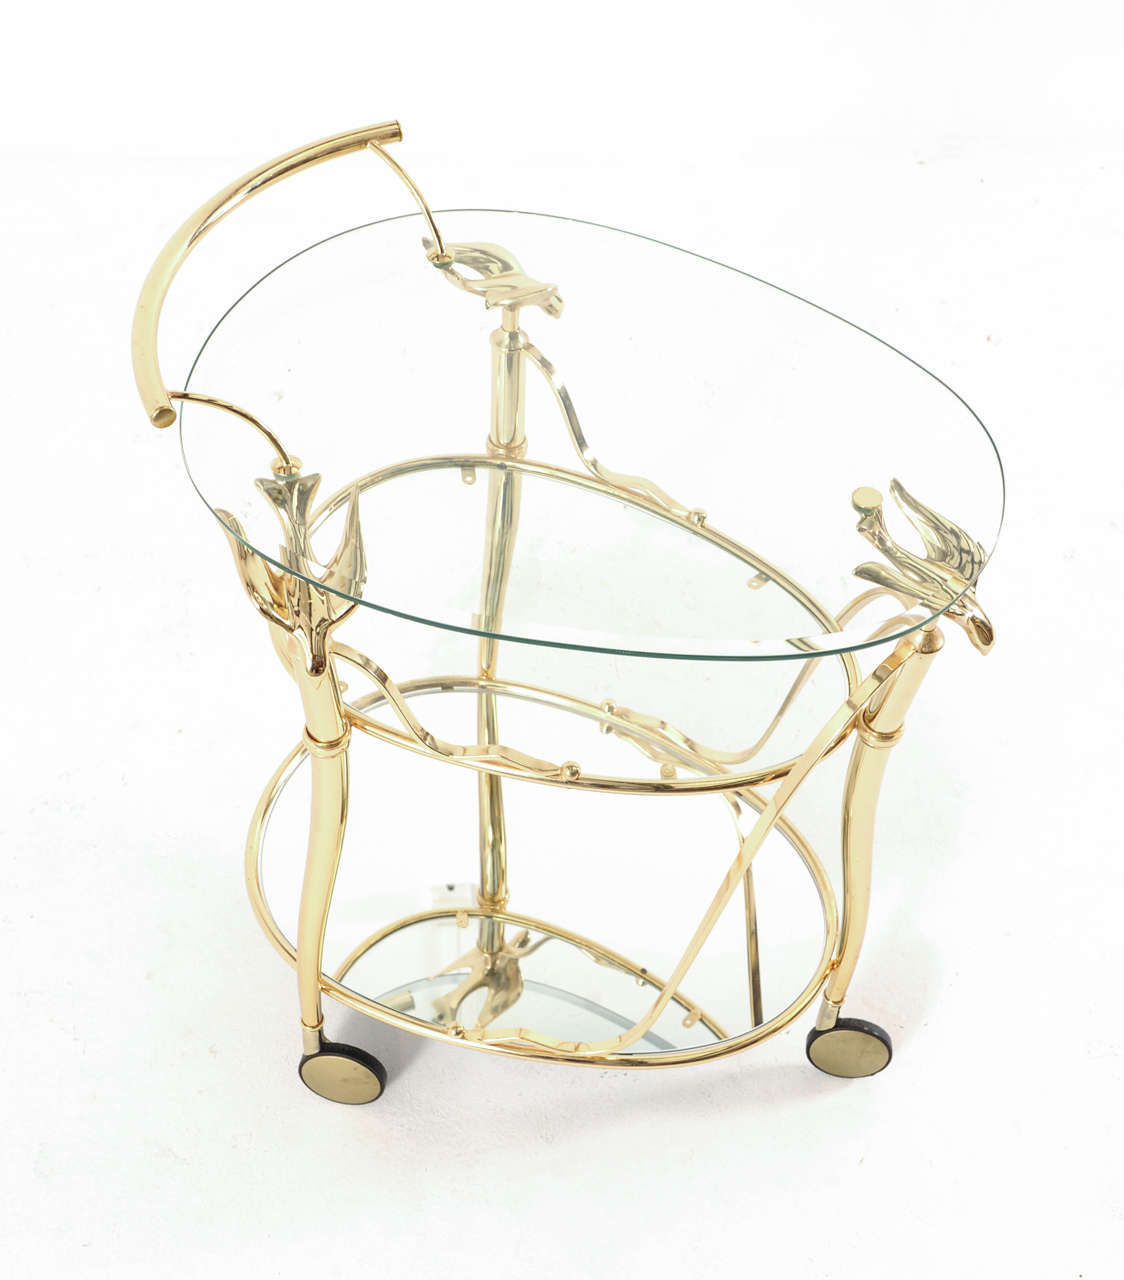 Late 20th Century Gilded Bar Cart or Serving Trolley with Three Levels on Wheels